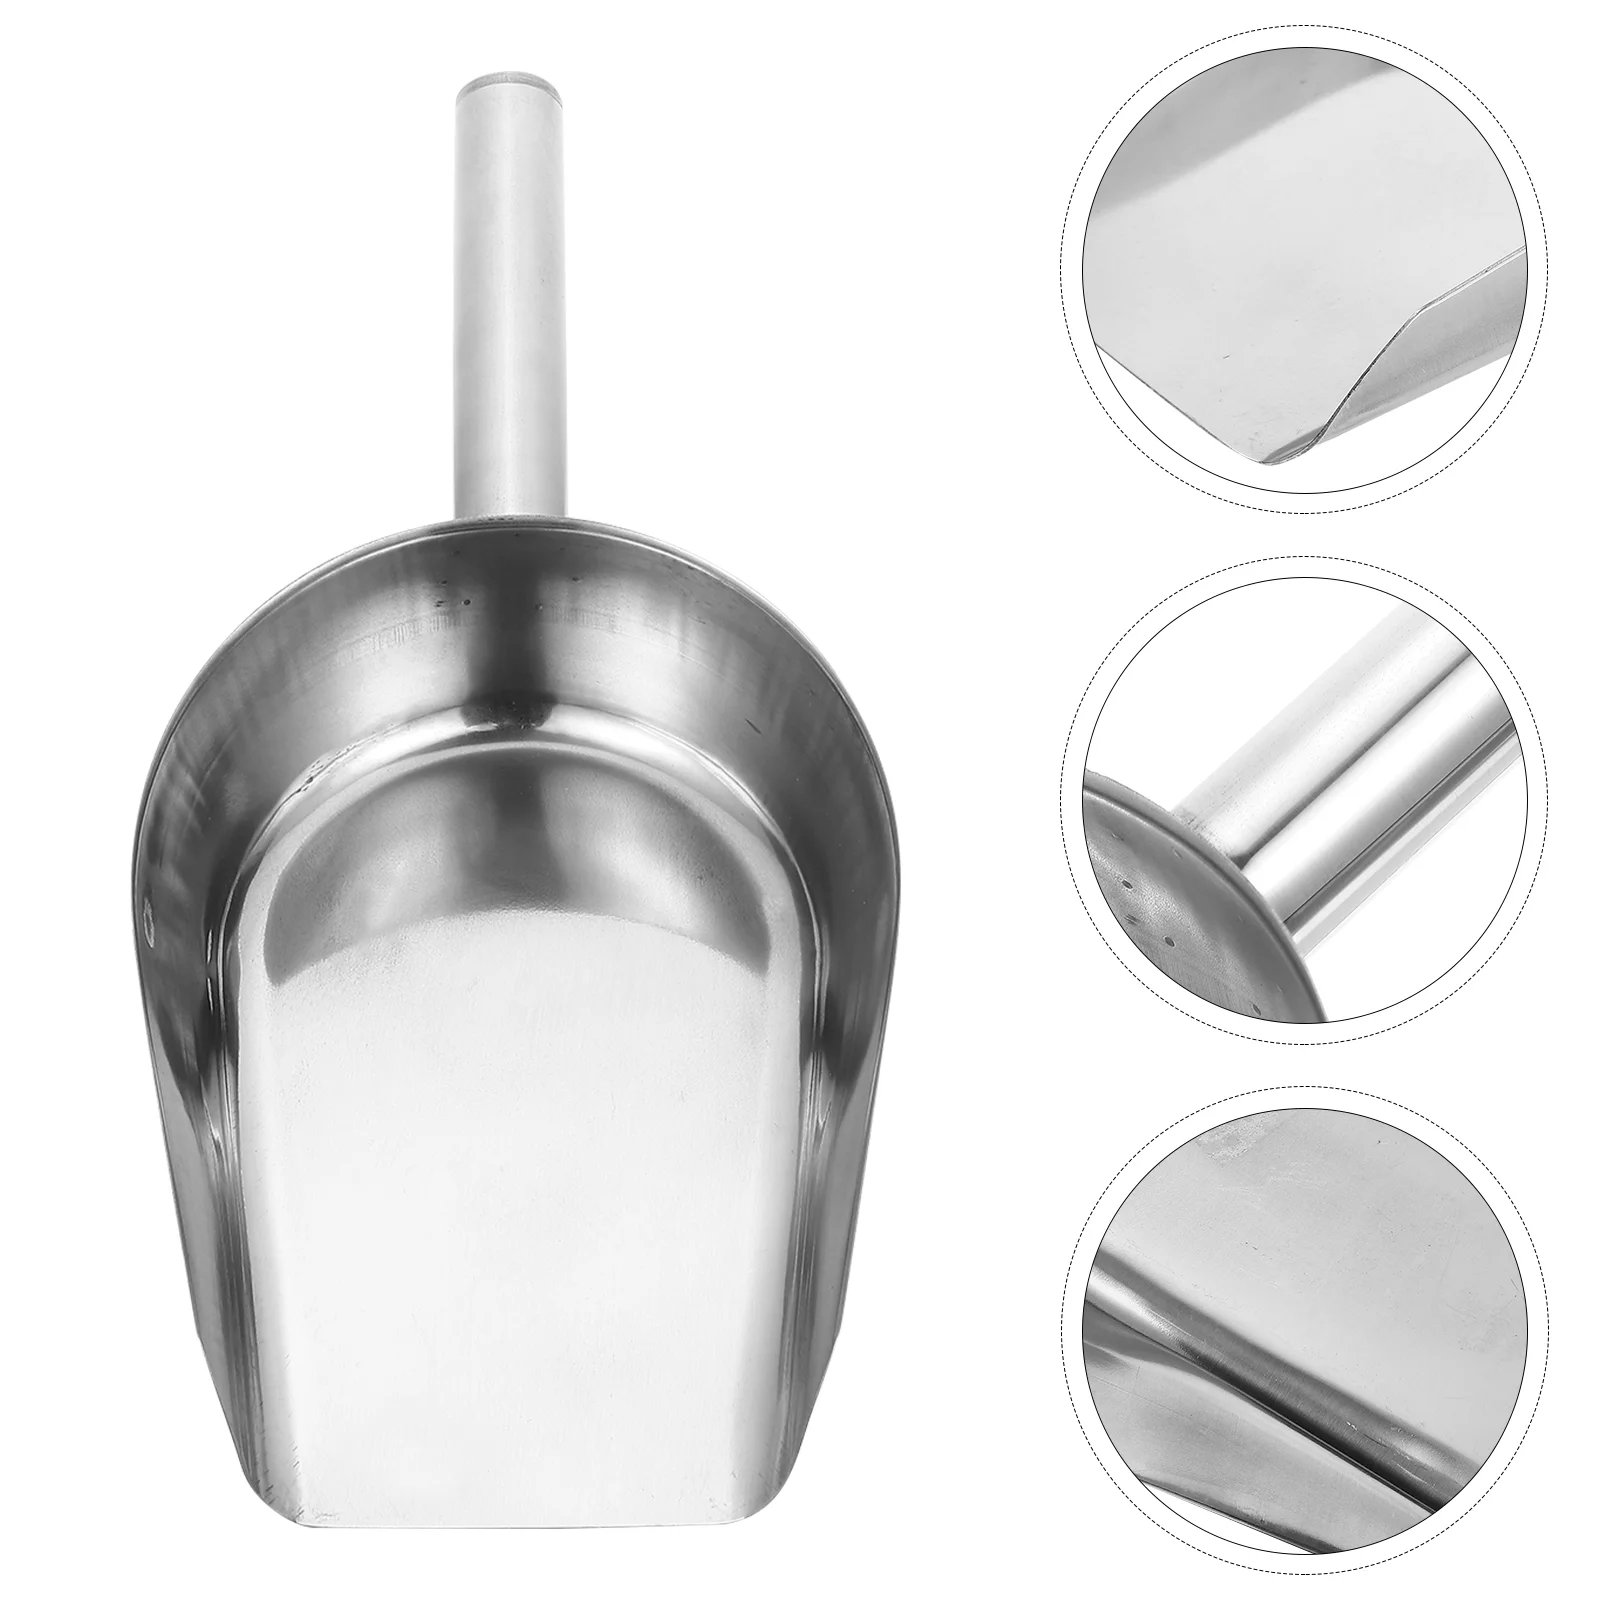 

Sand Stainless Steel Multi-functional Glass Serving Tray Durable Ice Scoop Kitchen Flour Coffee Bean Container